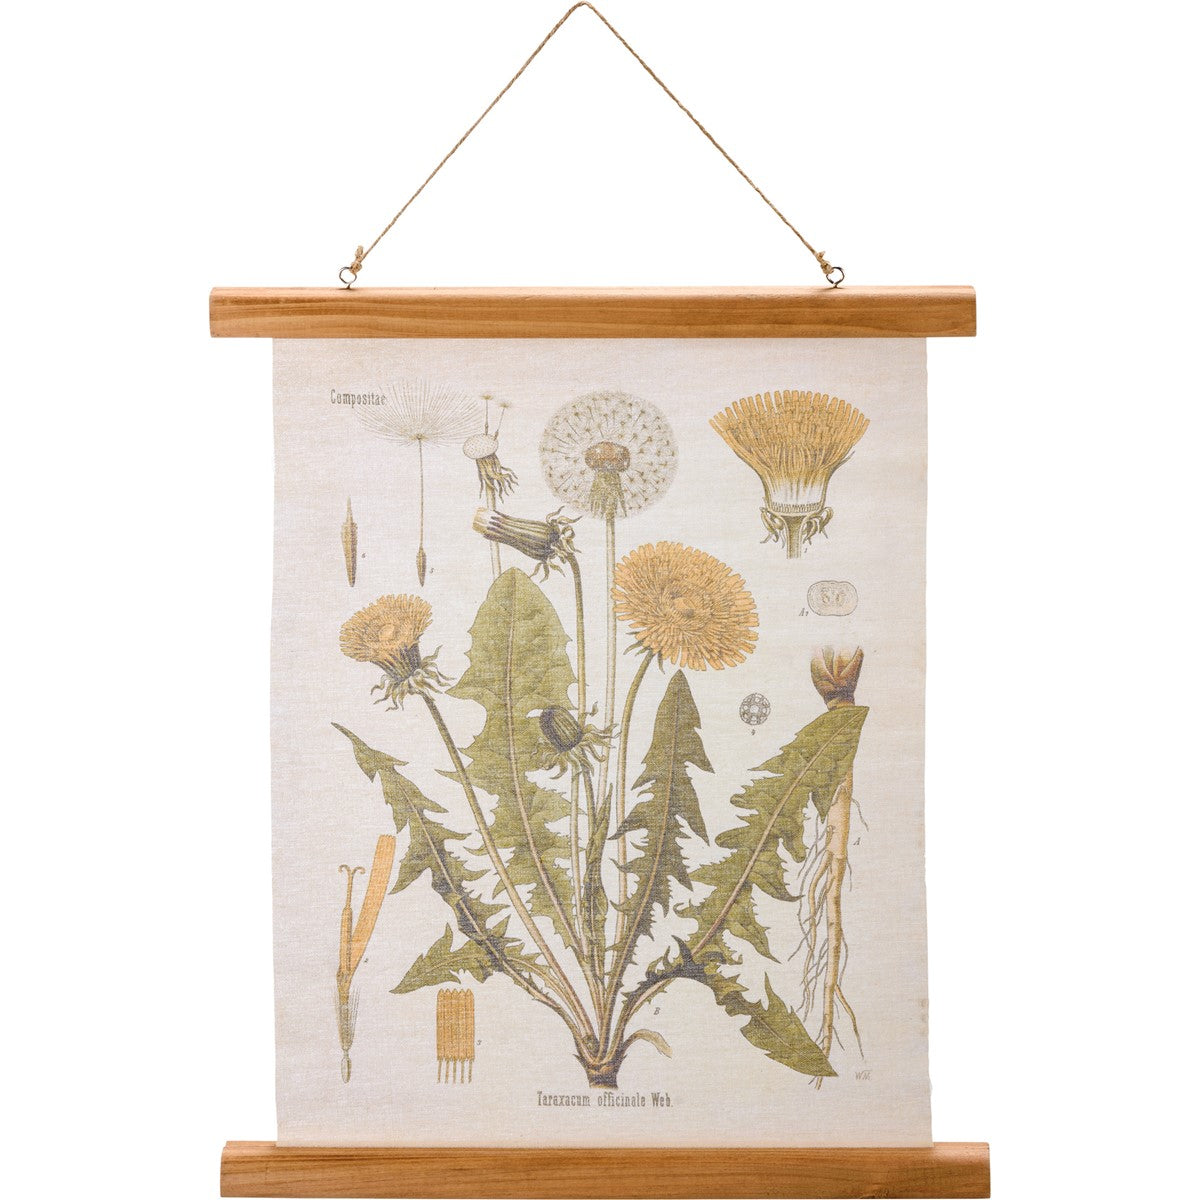 canvas scroll with dandelion botanical study printed on it.